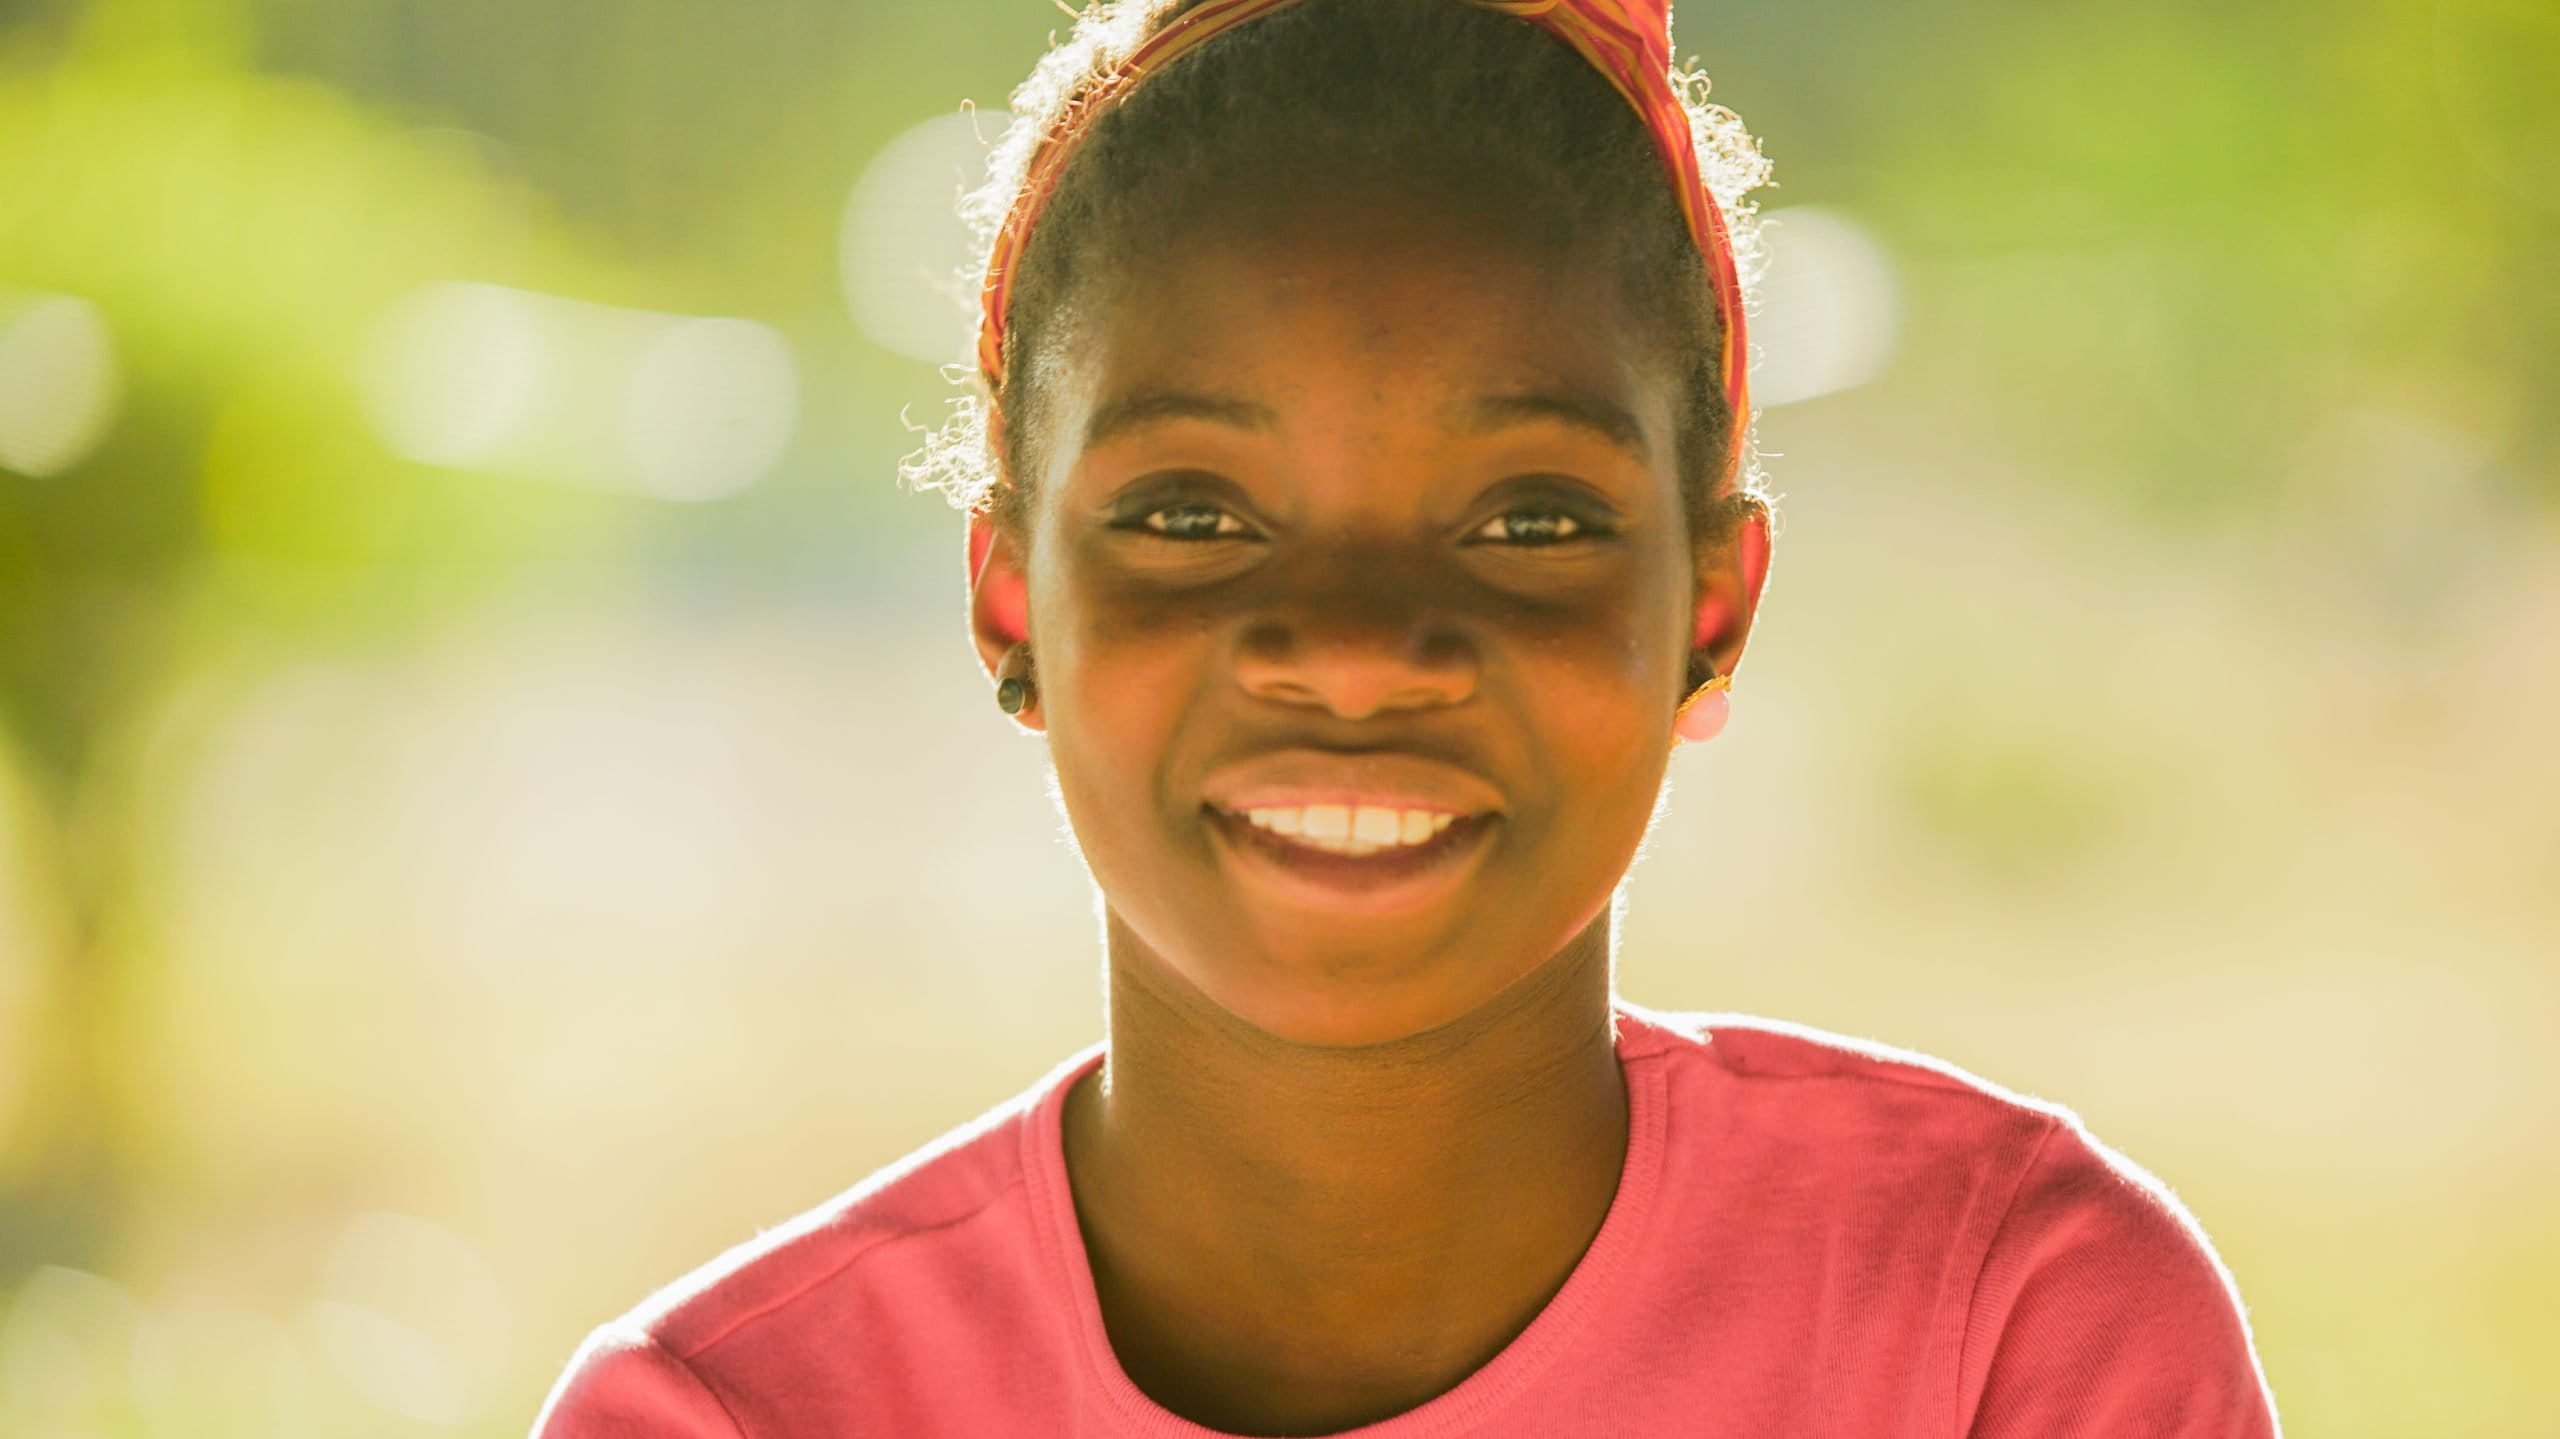 Zambian girl wearing pink and smiling in front of a green background outside.